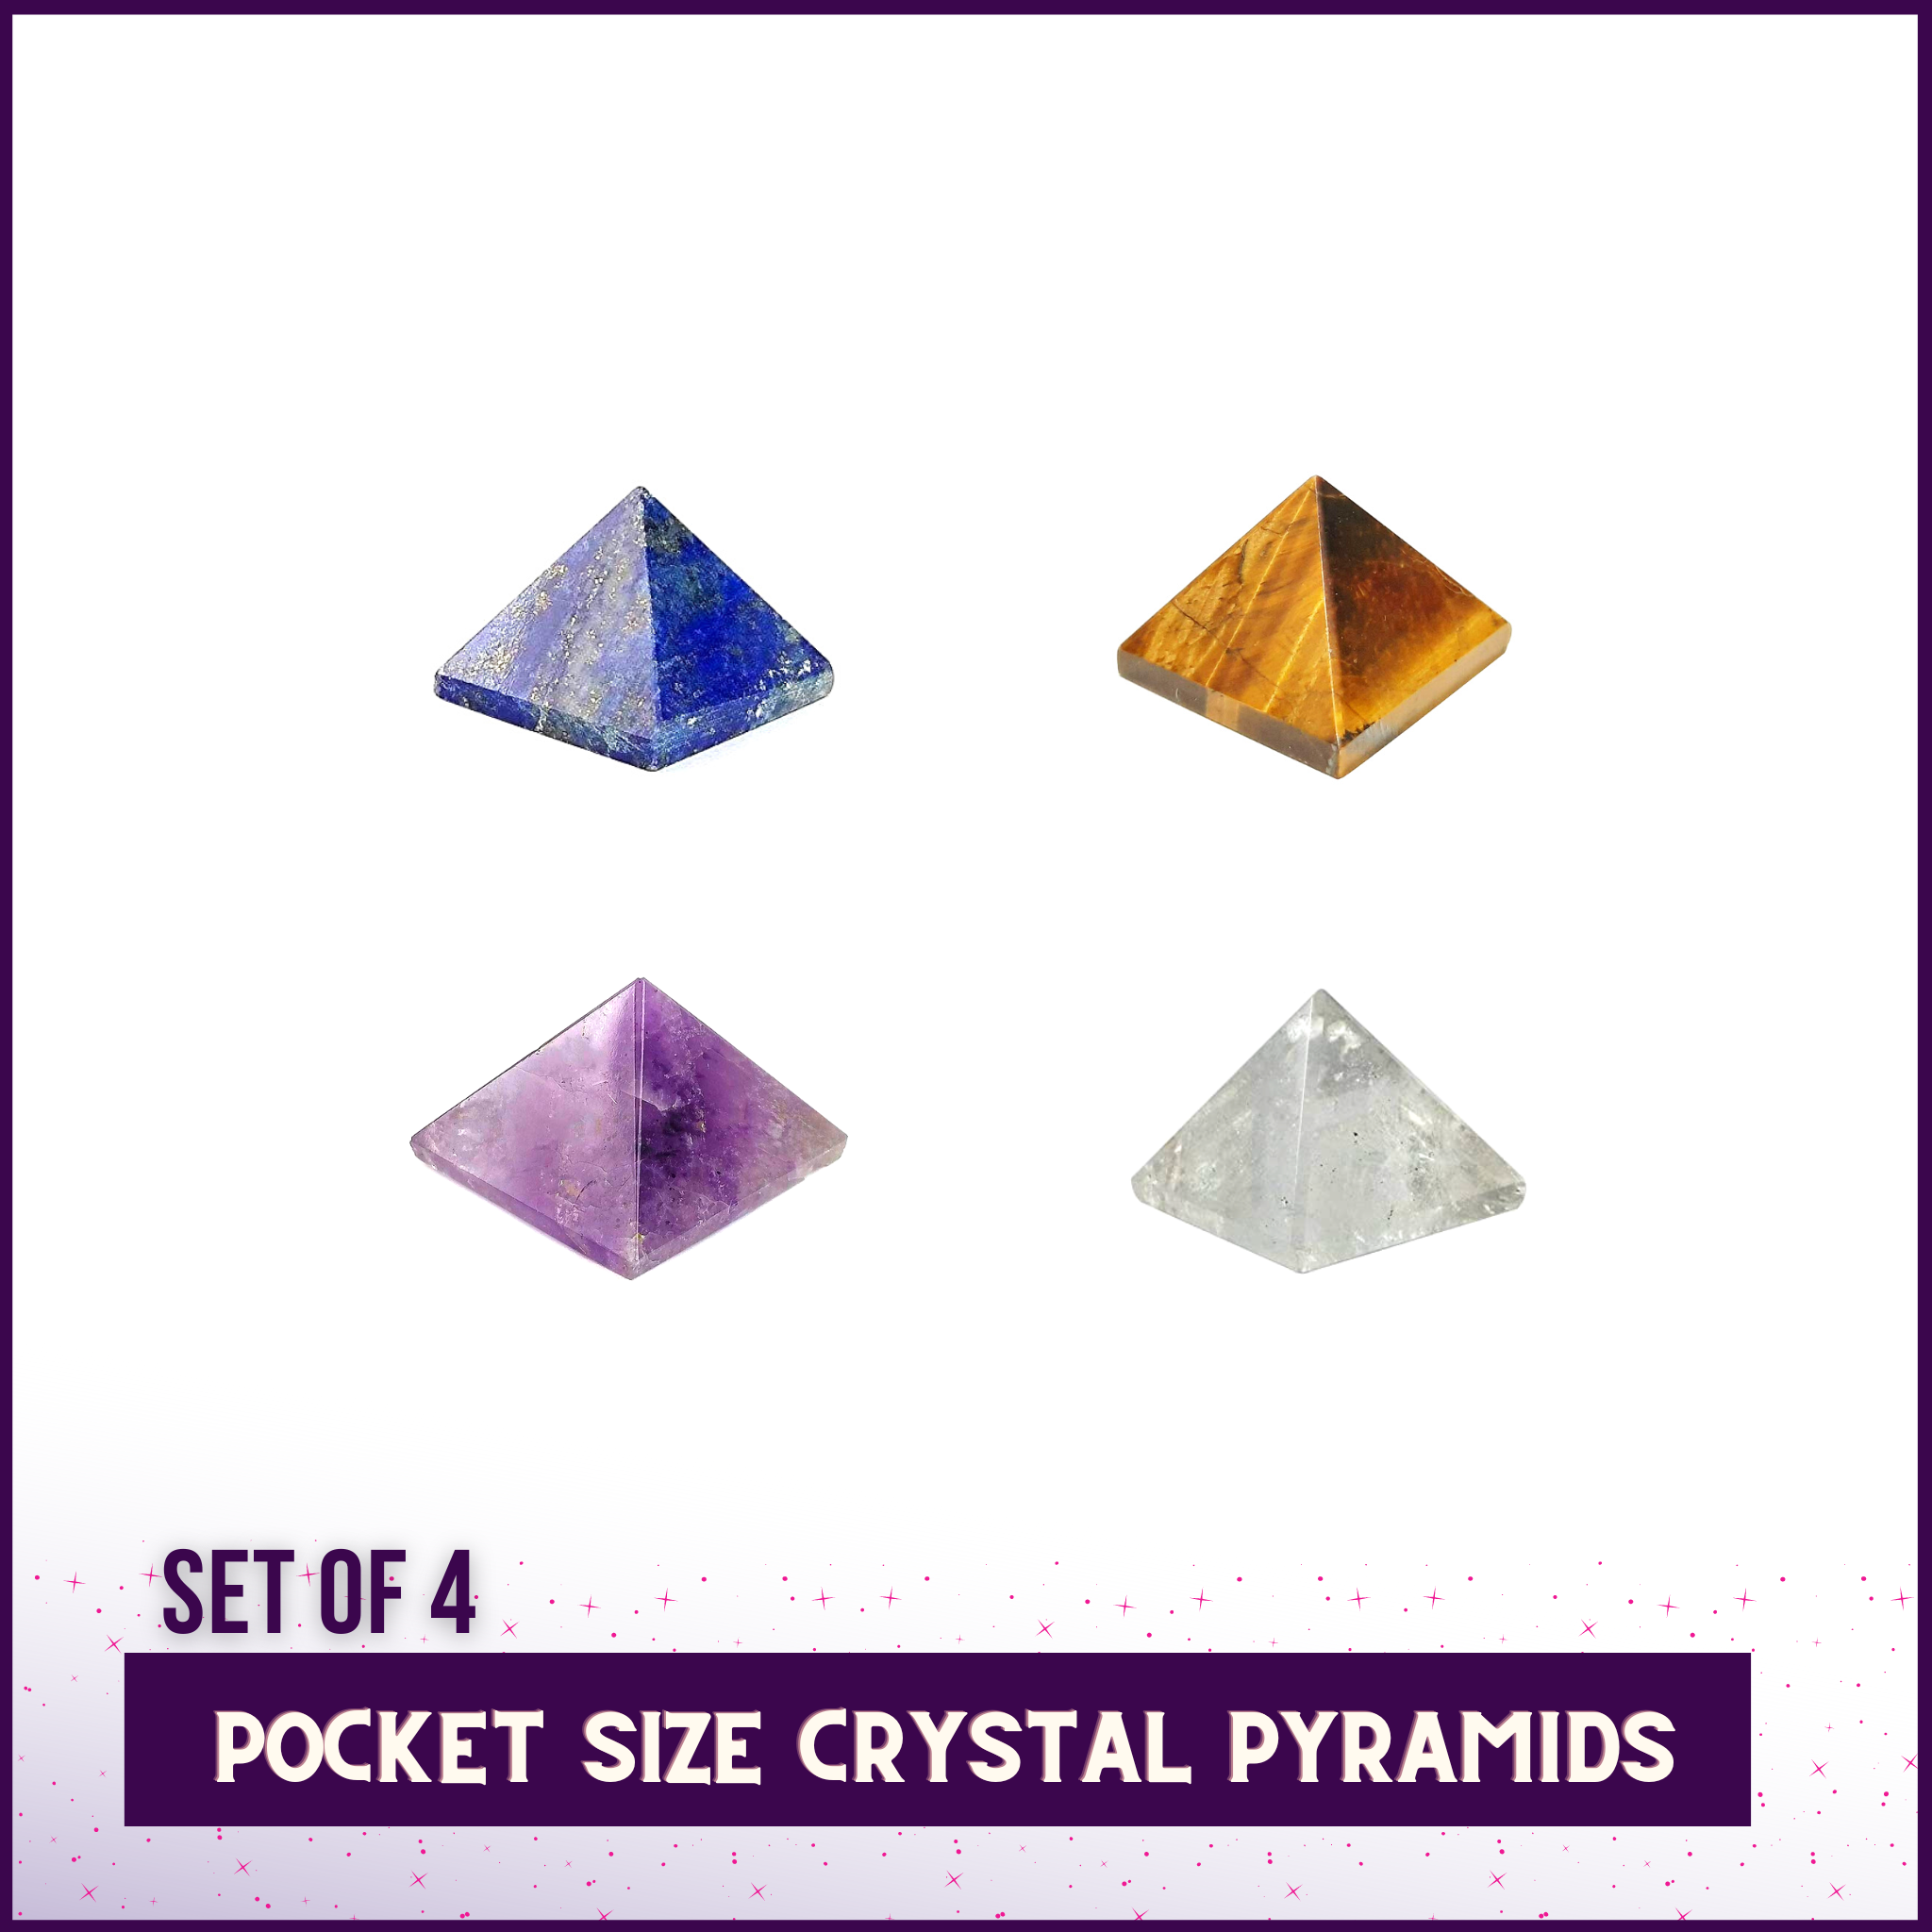 Pocket Size Portable Crystal Pyramids(10mm) For Wallets, Clutches & Handbags - Set of 4 - 0